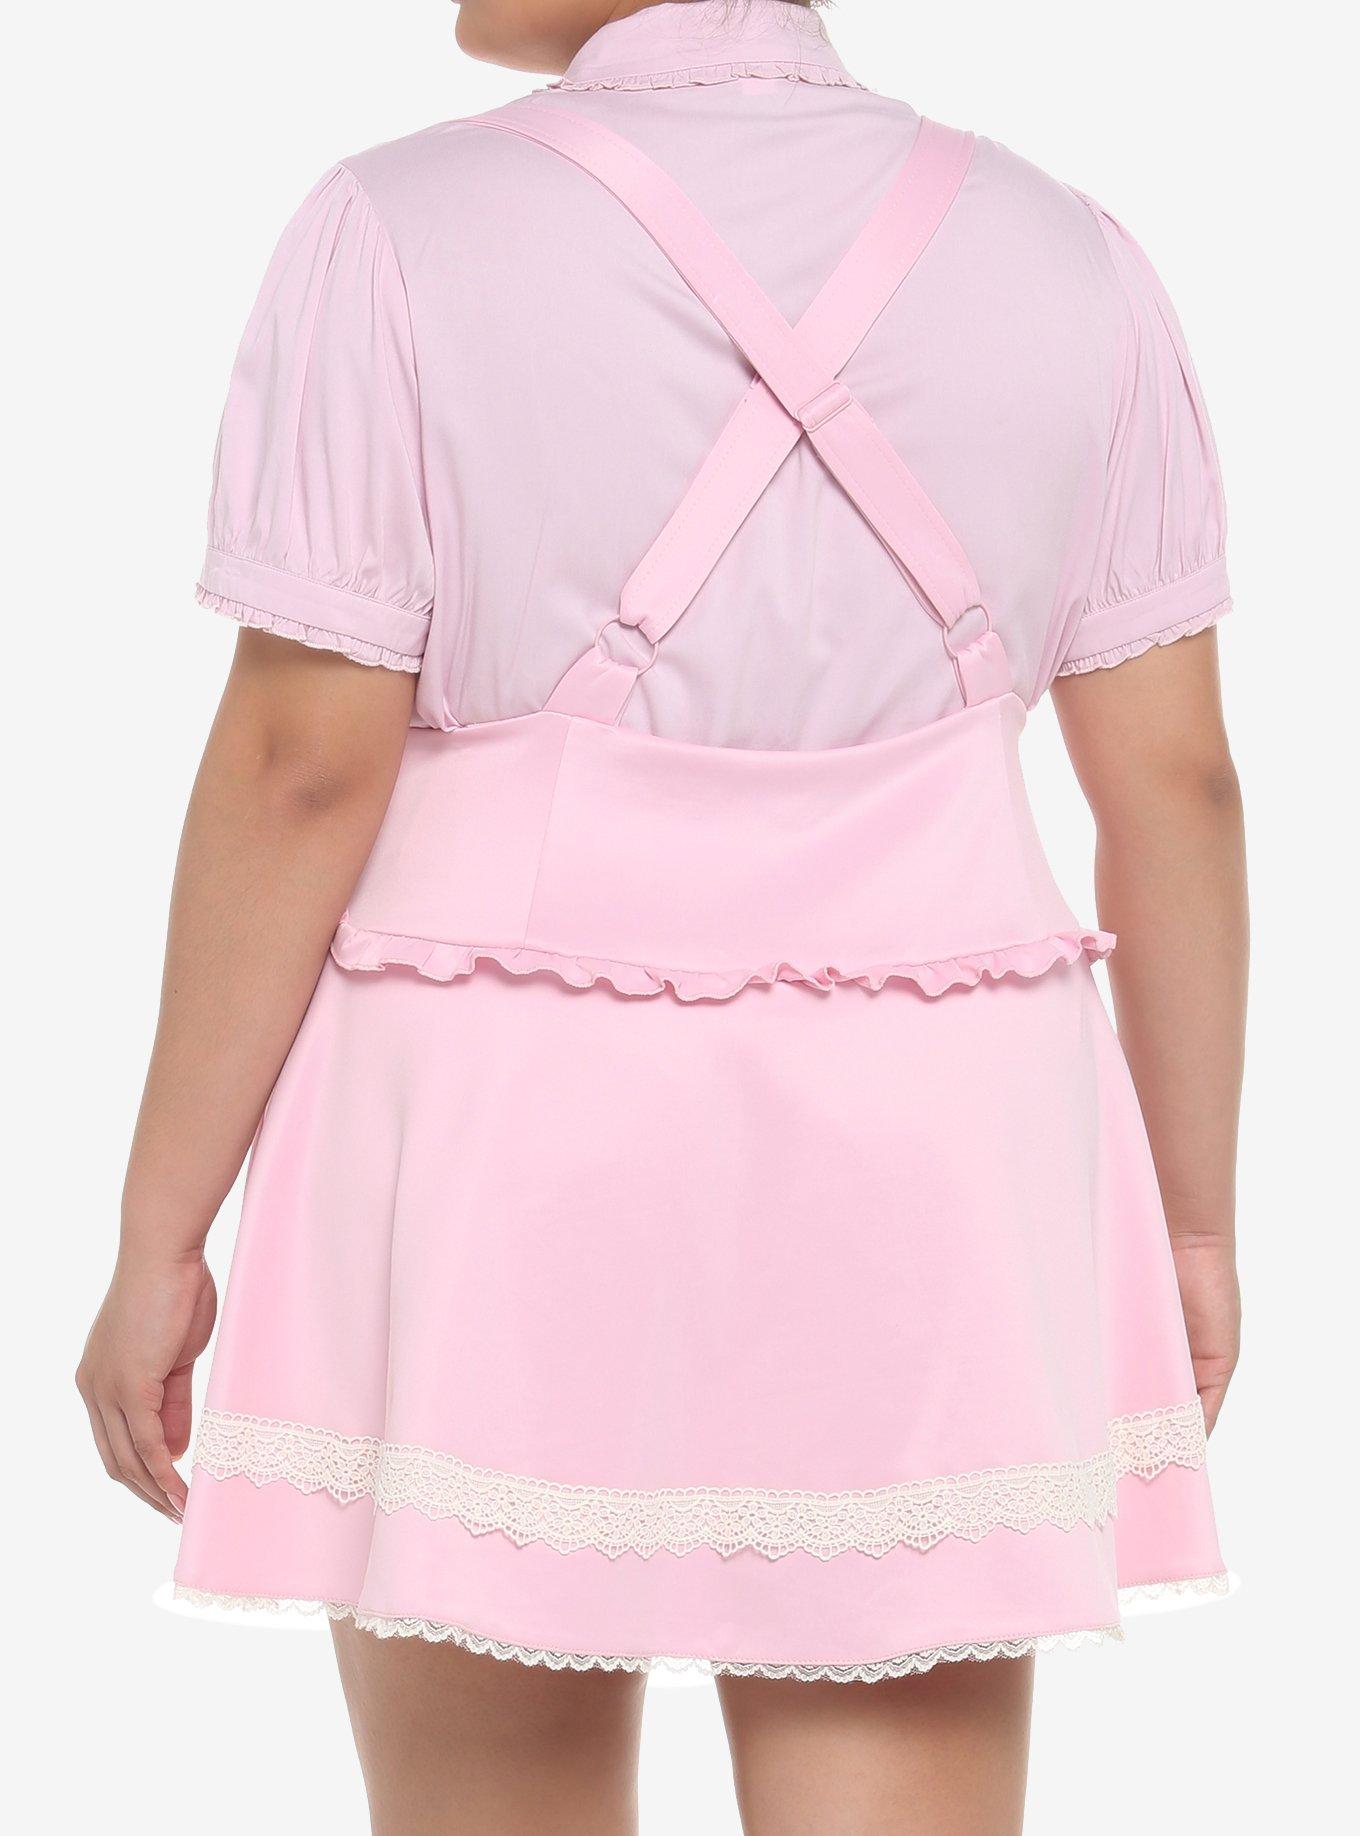 Pink Hearts & Lace Suspender Skirt Plus Size, PINK, alternate